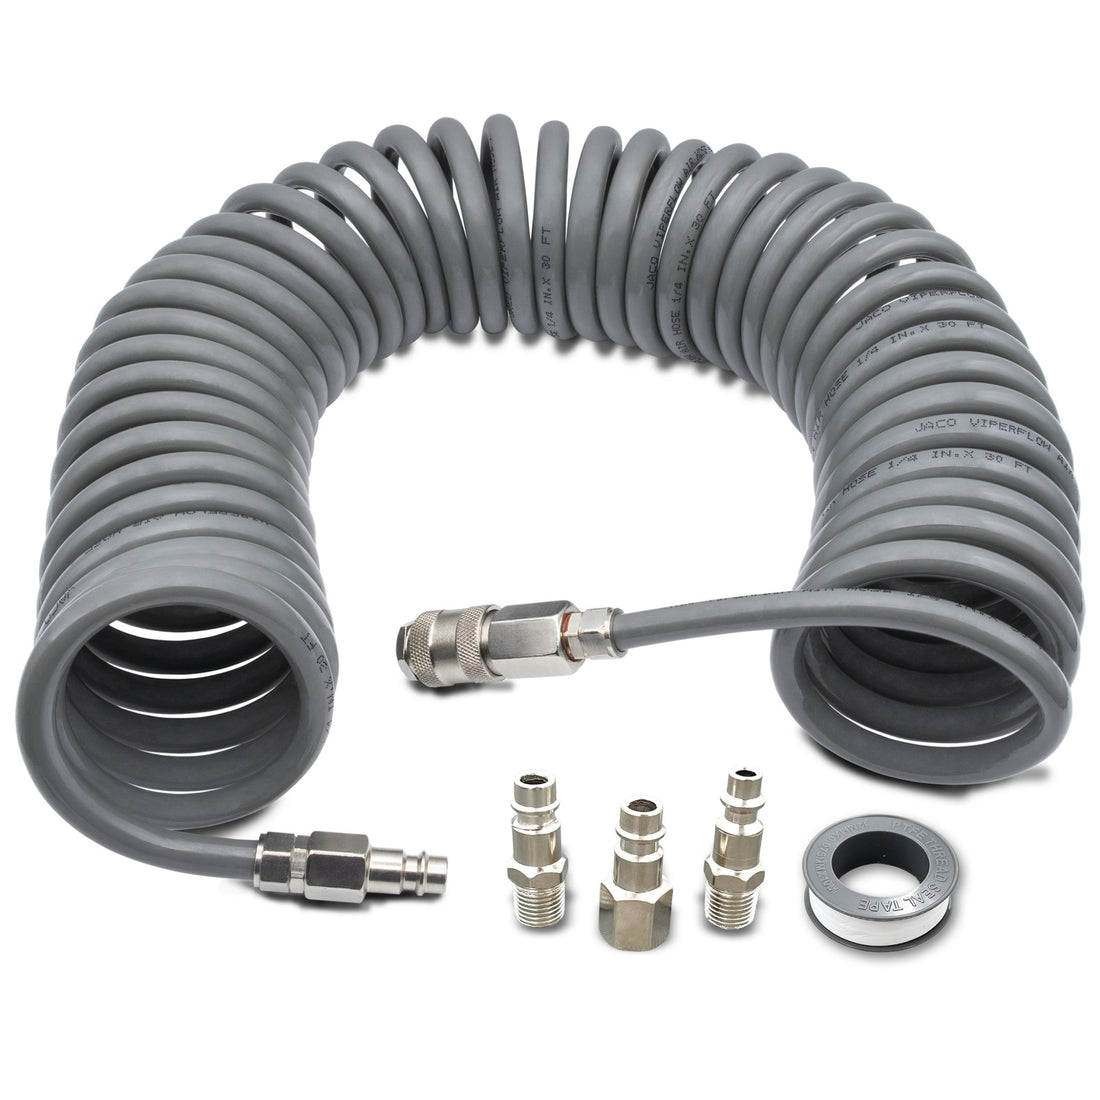 Polyurethane Coiled Air Hose Kit - 1/4" x 30 ft | with Air Compressor Fittings - Diesel Freak